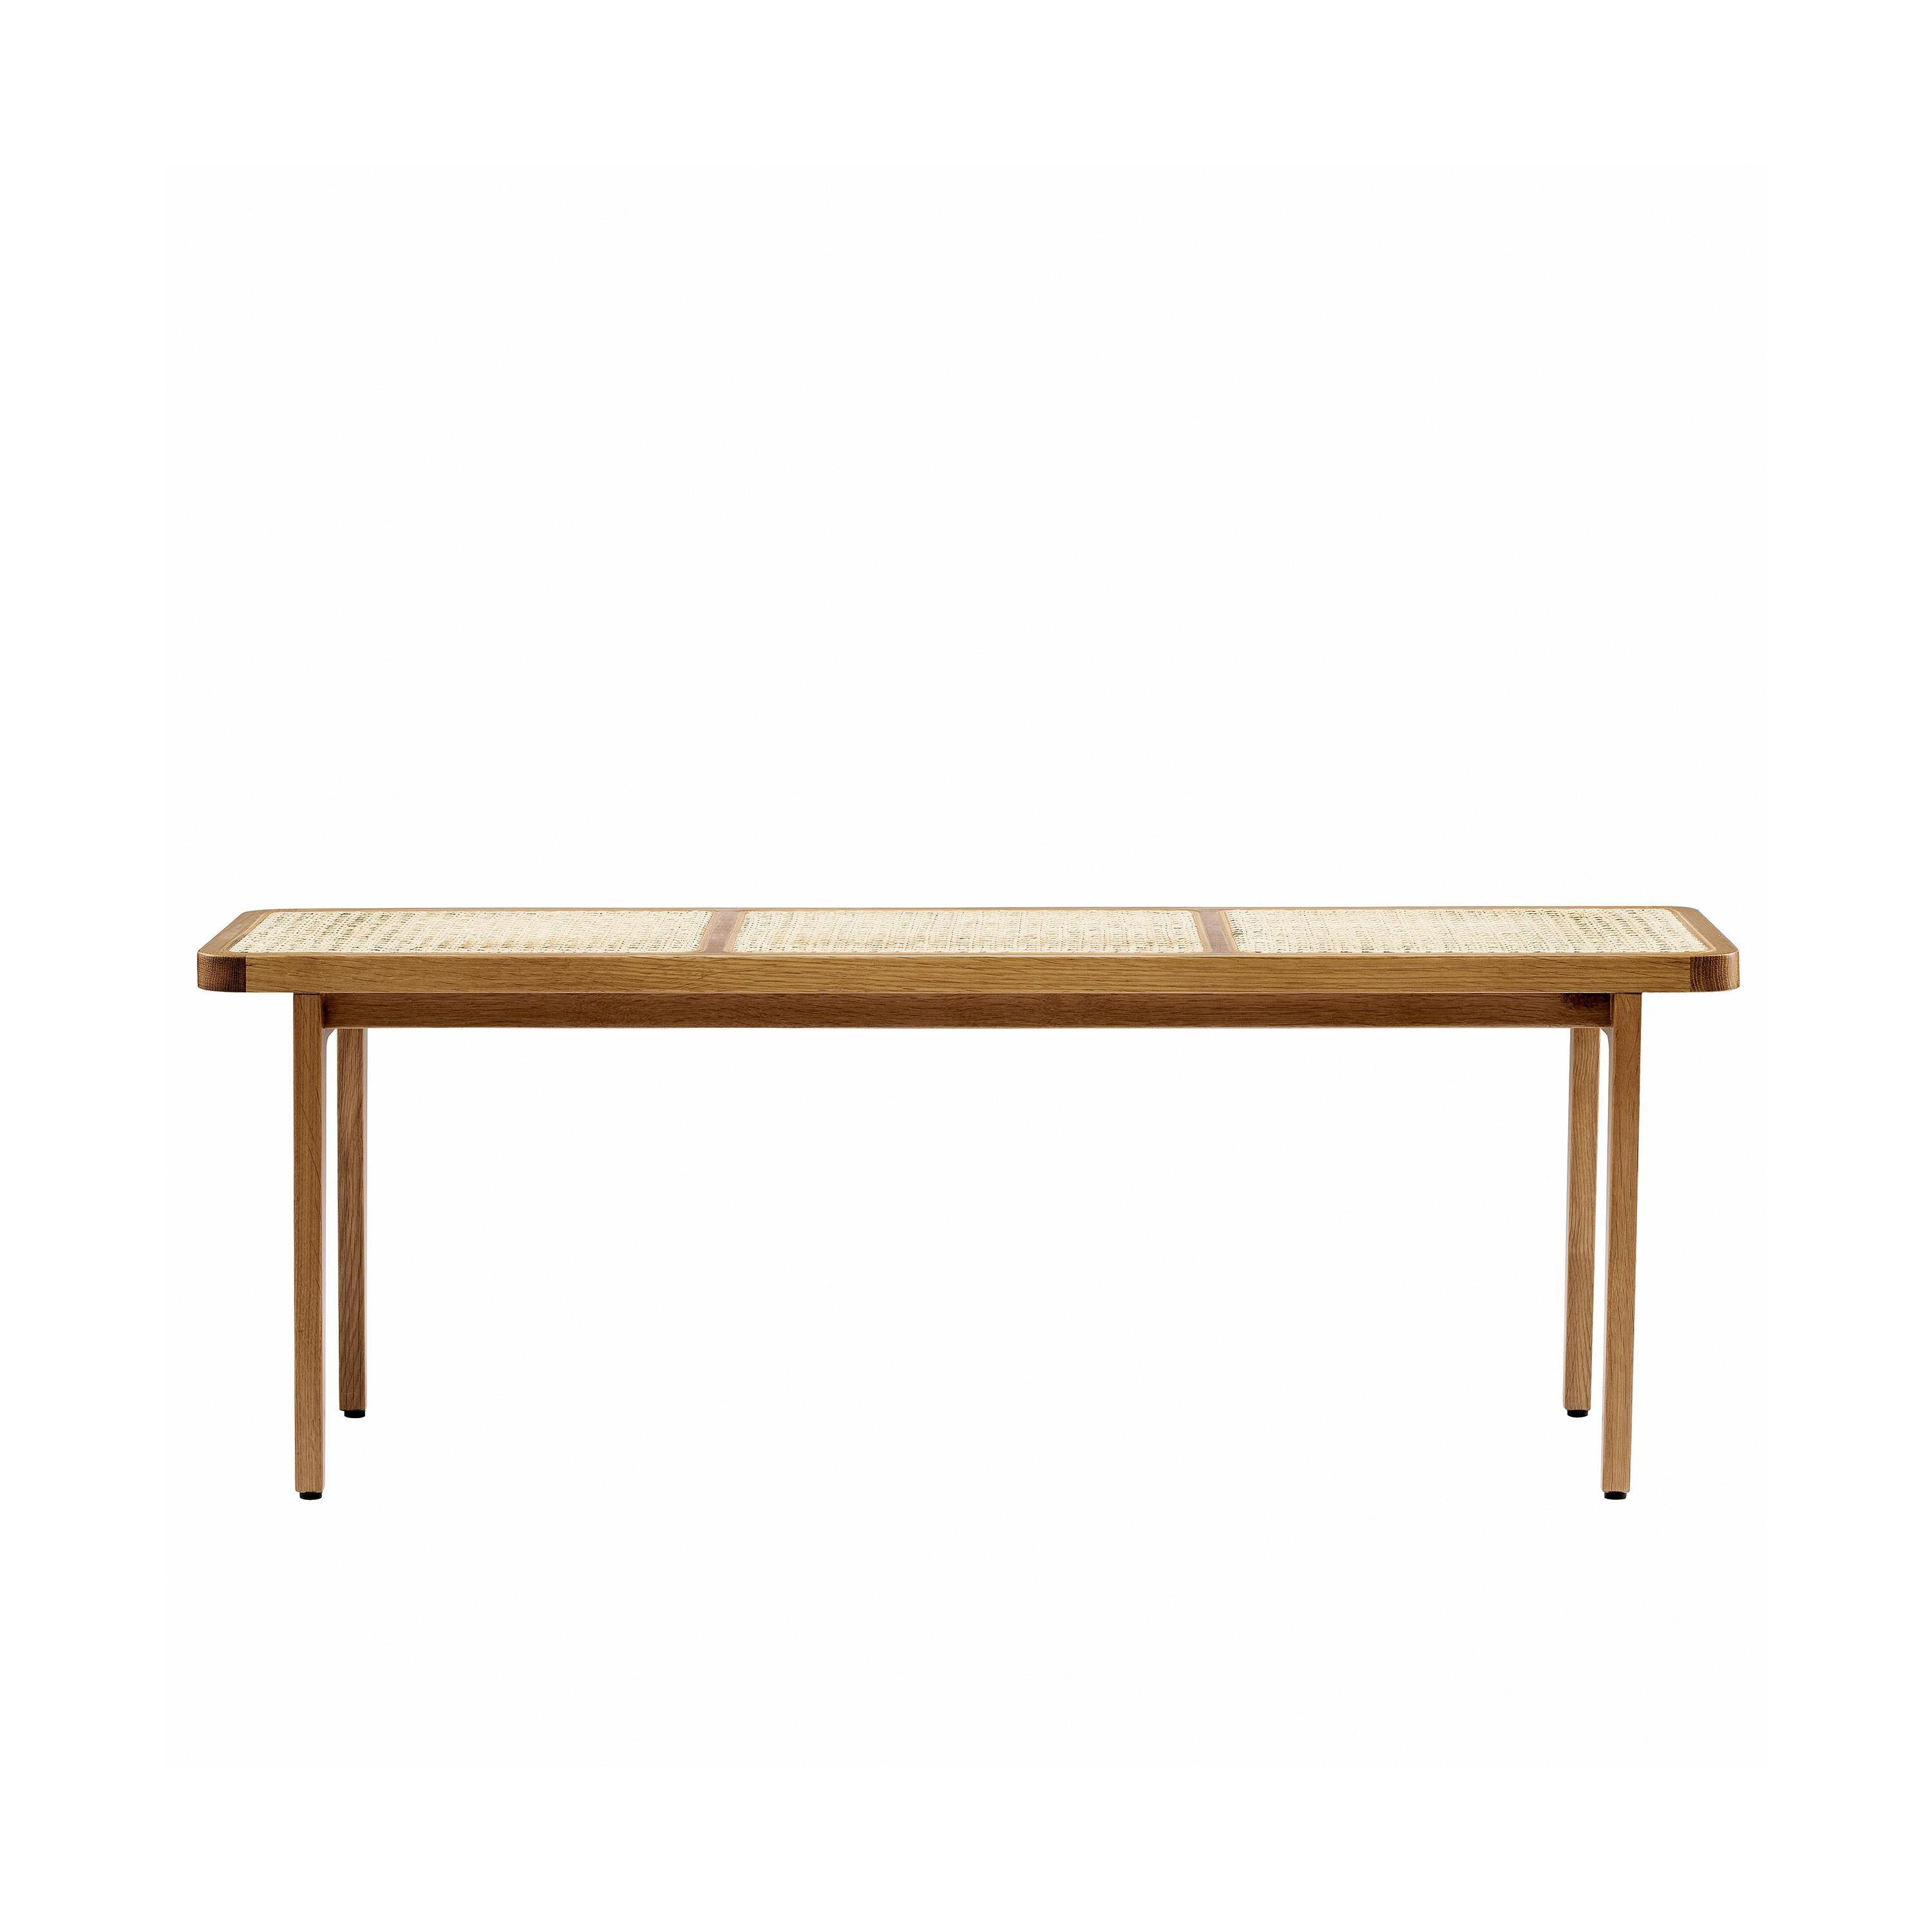 LE ROI BENCH
by Kristian Sofus Hansen & Tommy Hyldahl

Named after the French word for “King”, Le Roi Bench is made of solid oak with inlaid natural French rattan. Inspired by the French colonial style furniture the Le Roi Bench is both timeless and